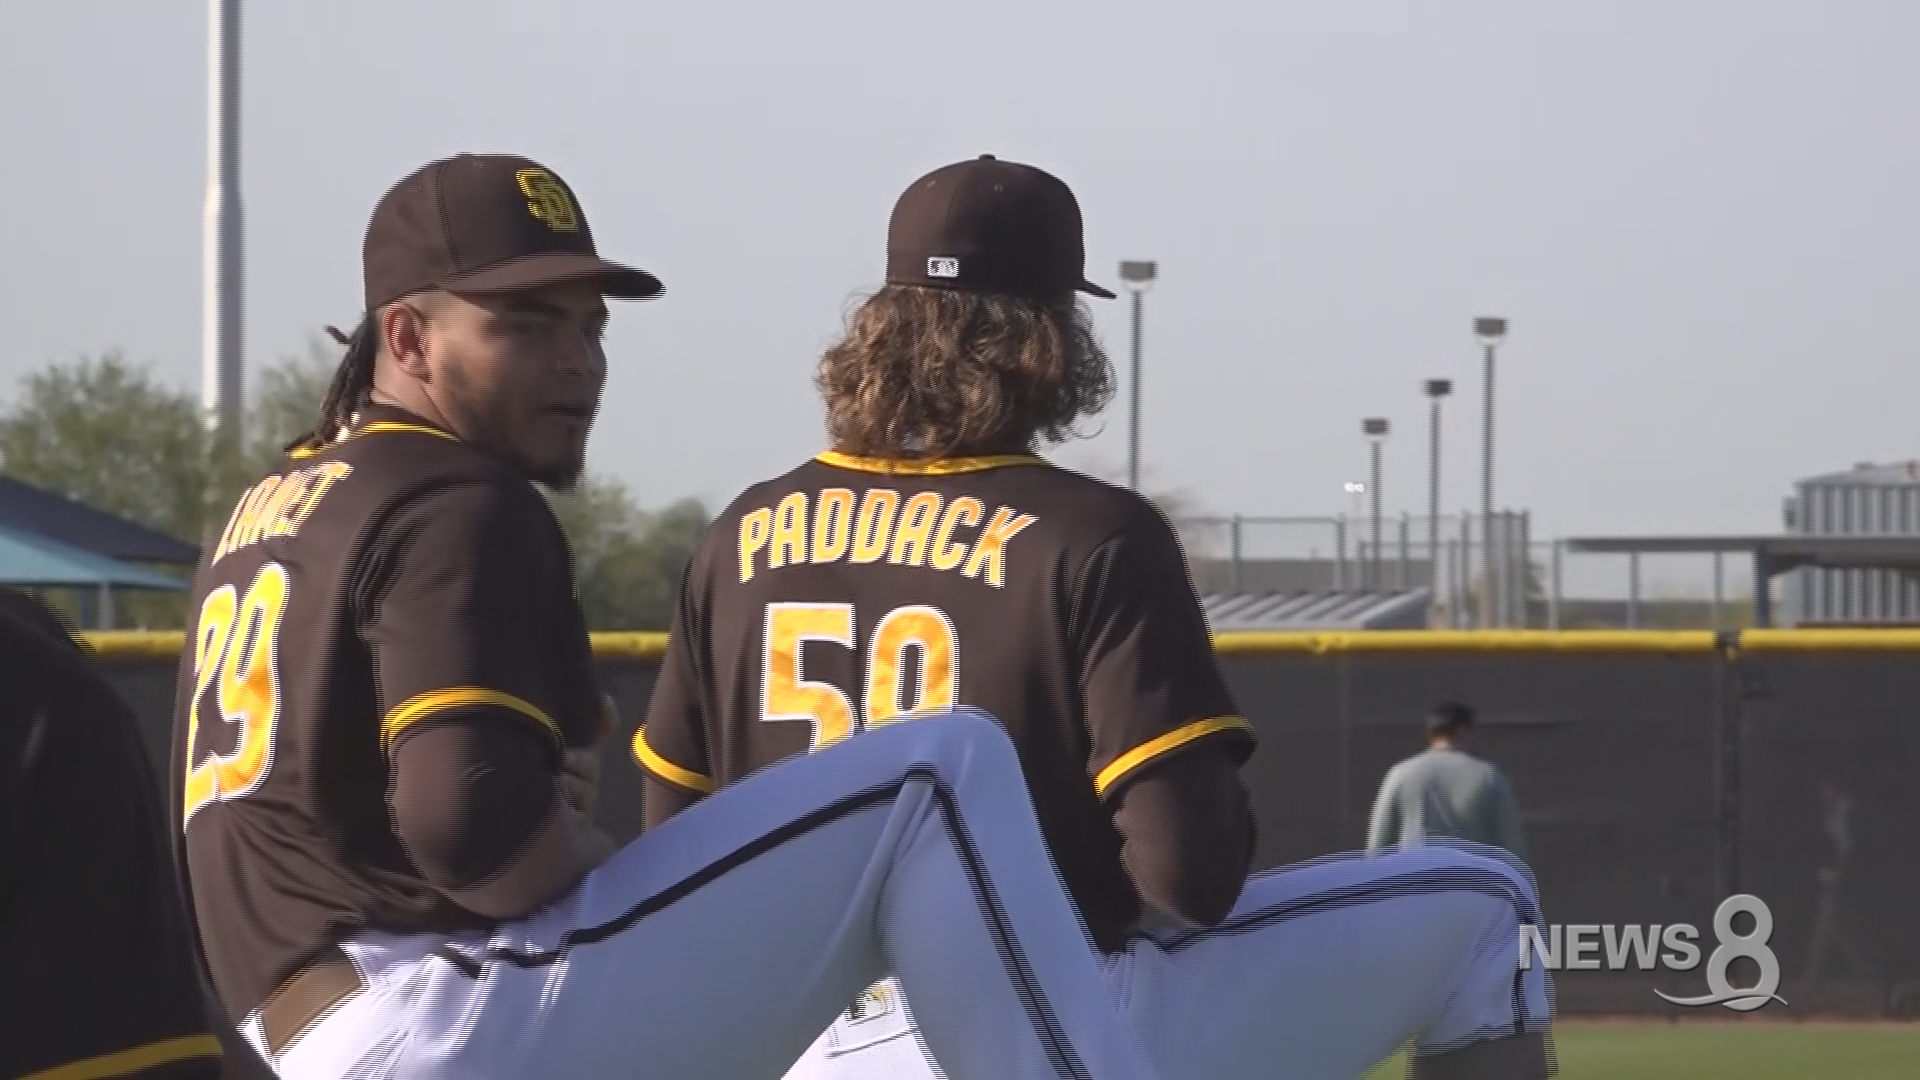 John and Jake caught up with Matt Strahm and Chris Paddack to see which one has the better look.